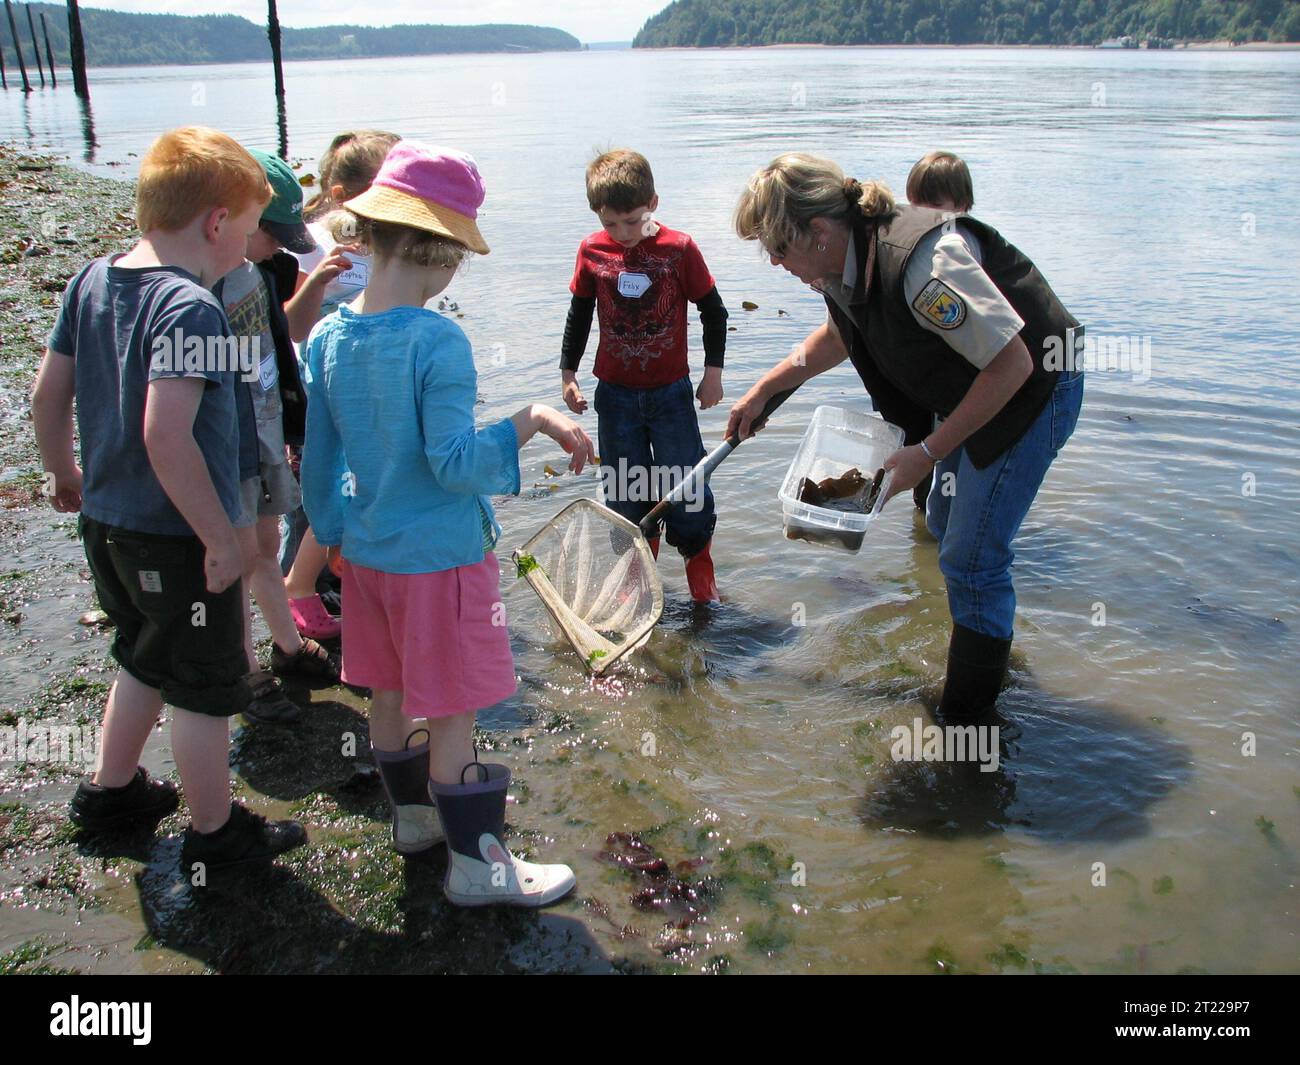 The Coastal Program works with schools to connect youth with nature. Subjects: Children; Connecting people with nature; Youth; Employees (USFWS); Uniforms; Service patch. Stock Photo